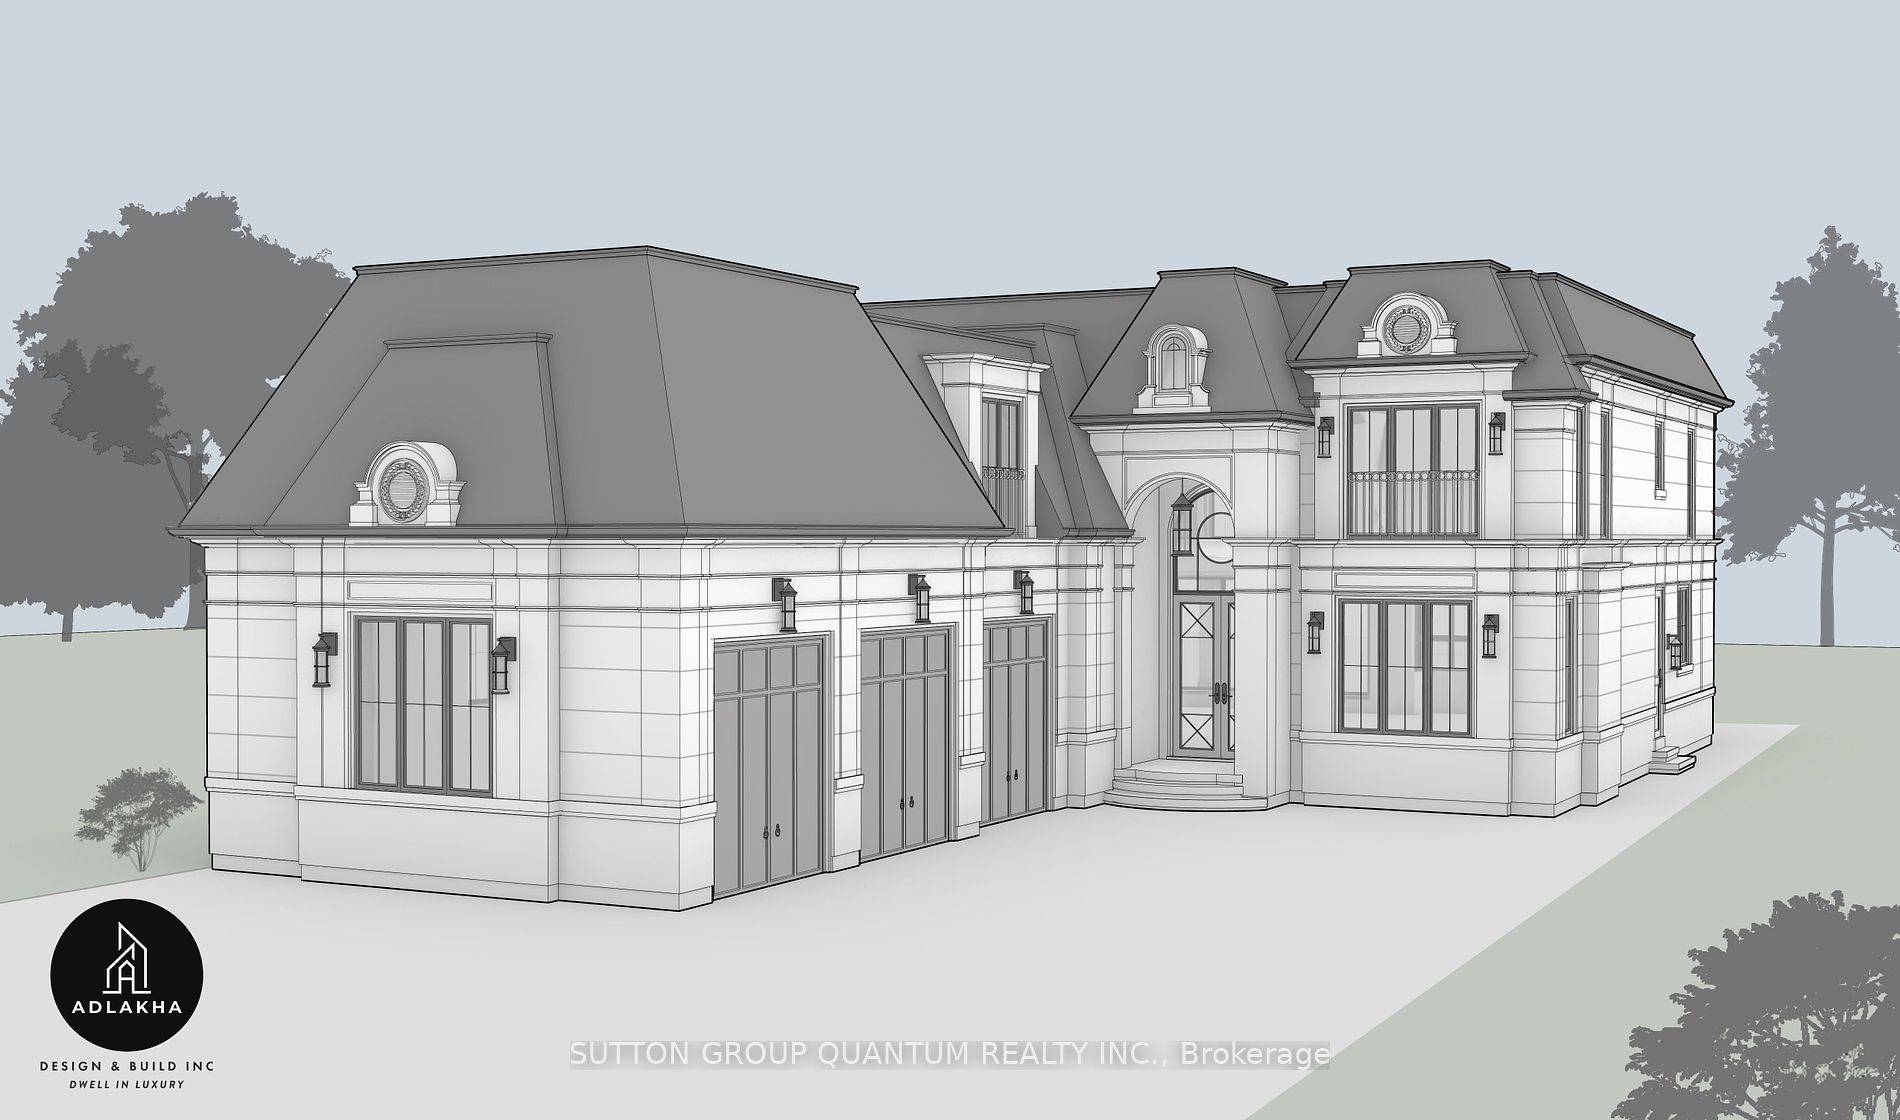 Nestled on a generously proportioned lot measuring 60 feet by 252 feet, an exquisite pre construction traditional house is poised for completion in August 2026.